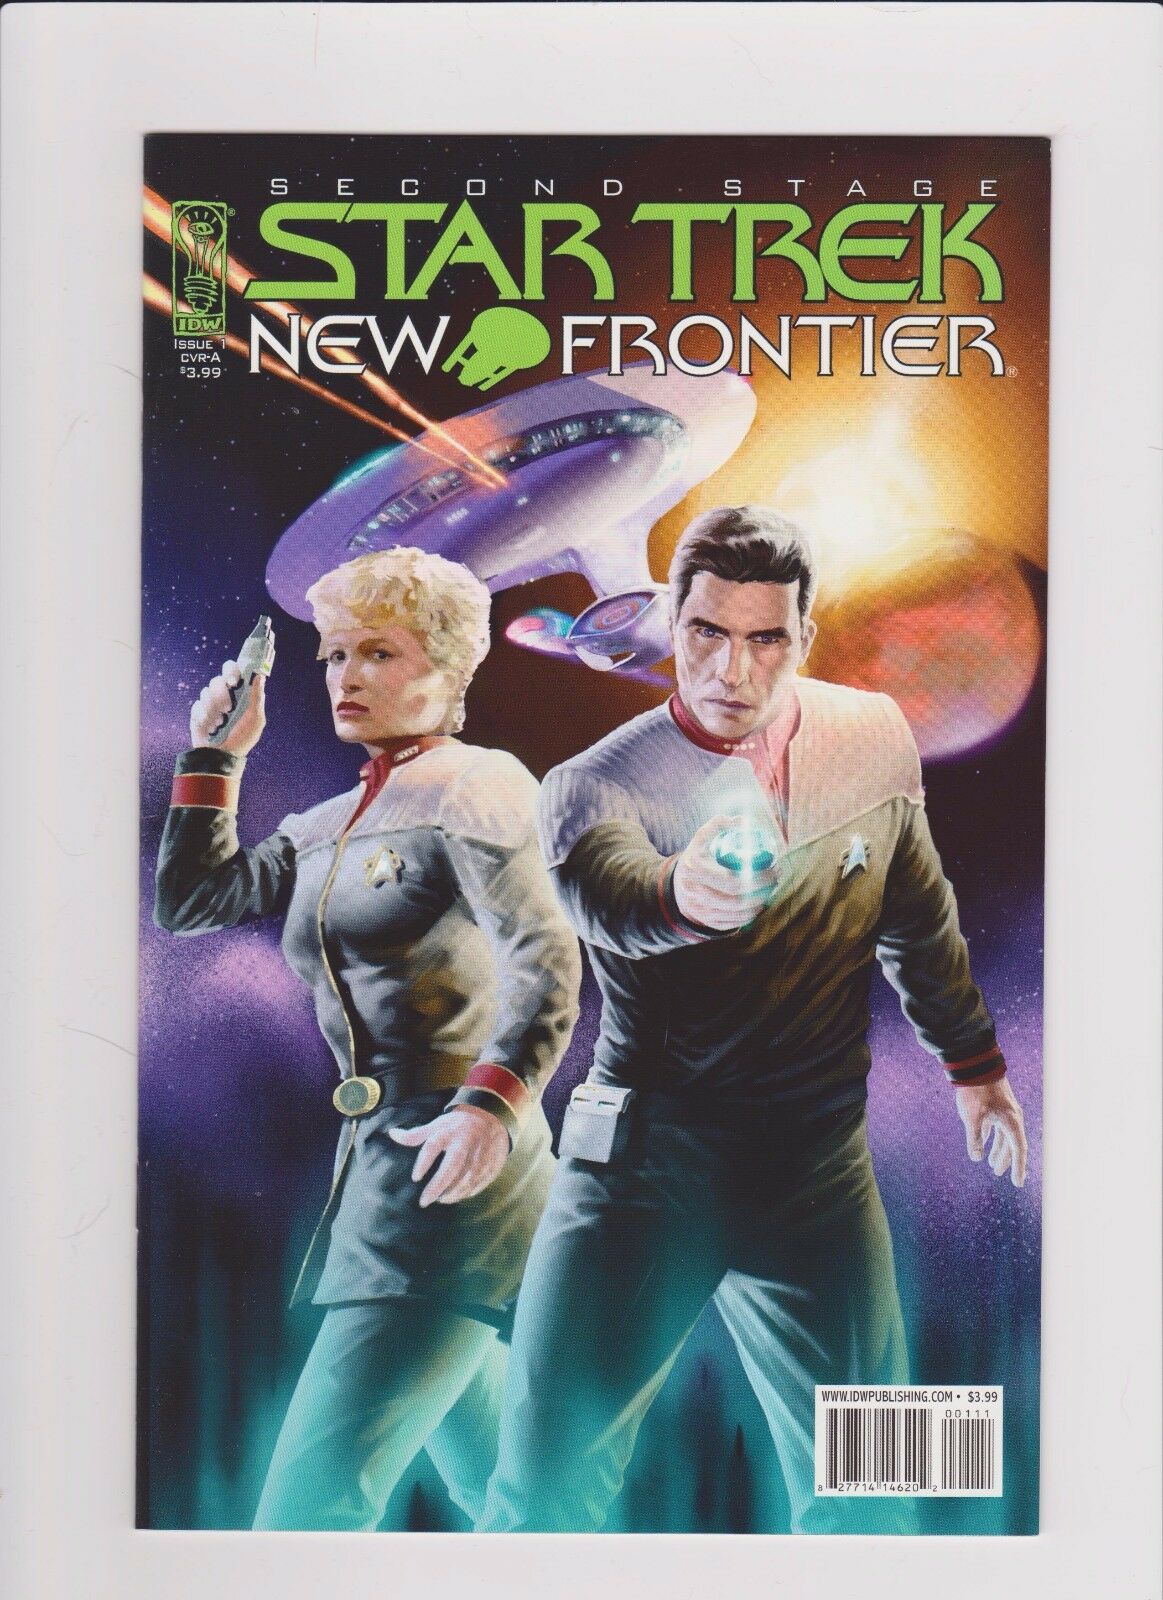 IDW! Star Trek New Frontier! Complete Series! Issues 15! Full Runs